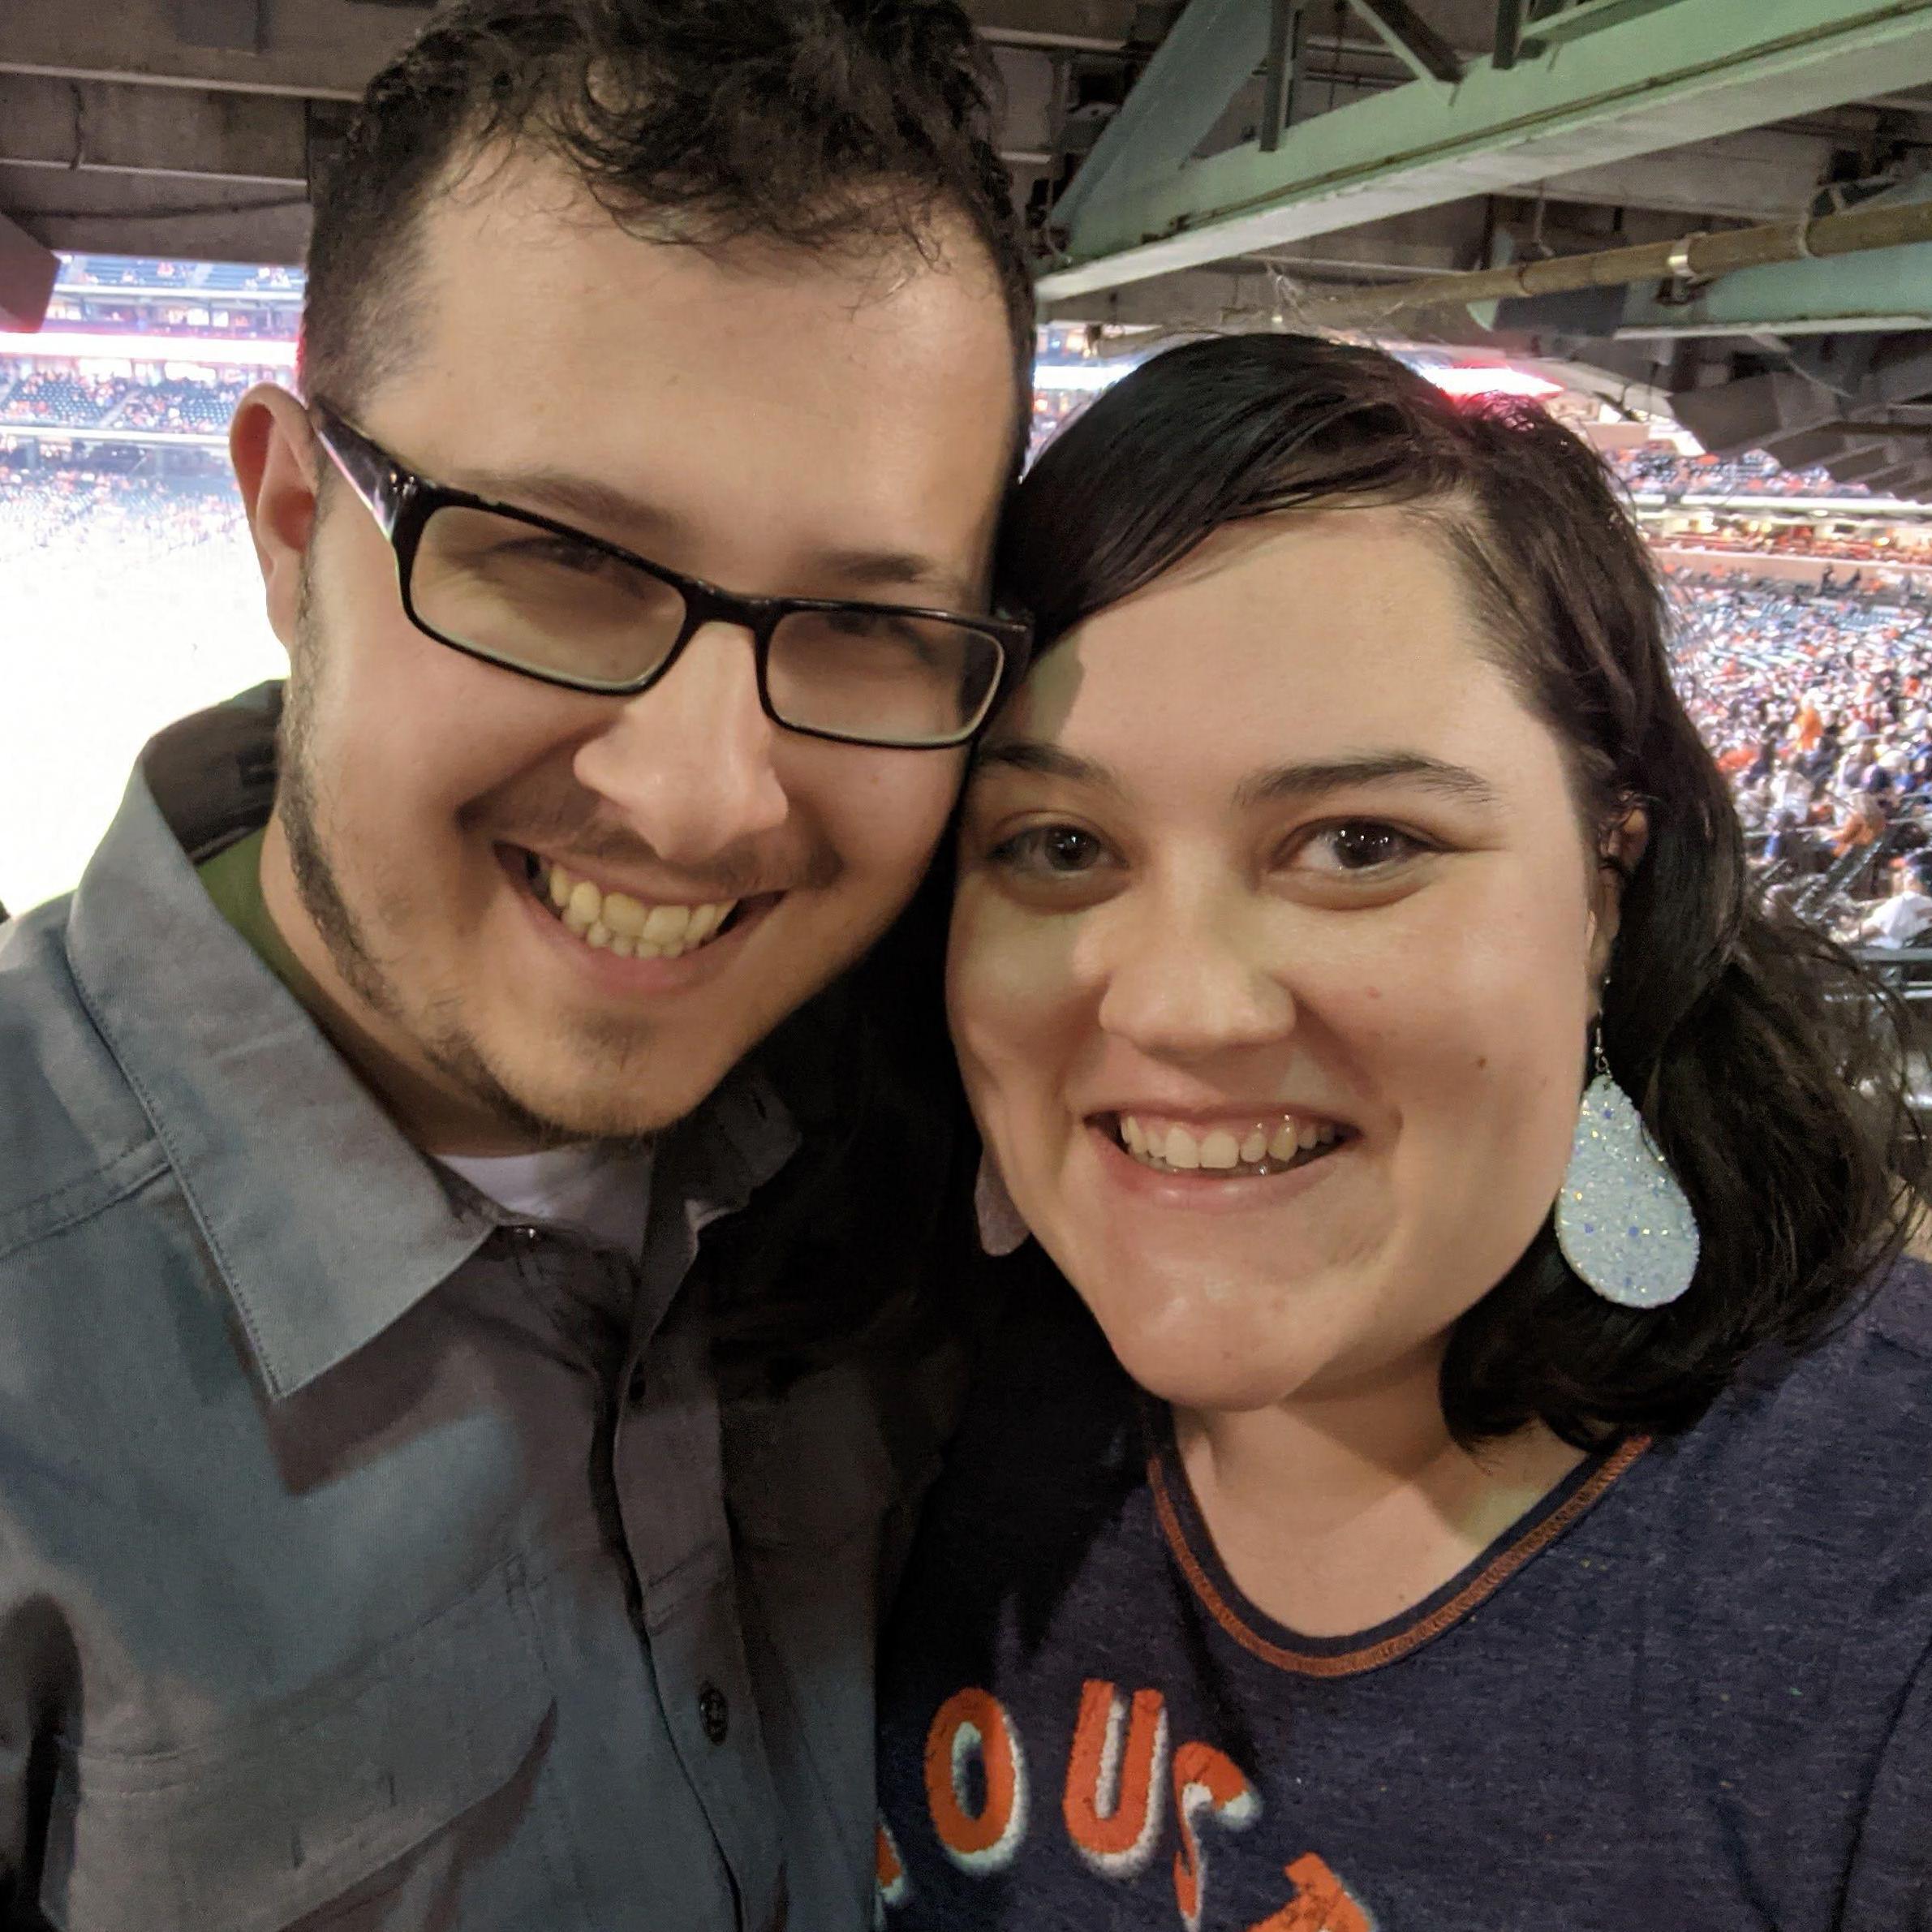 Astros game where we officially started dating October 3, 2022